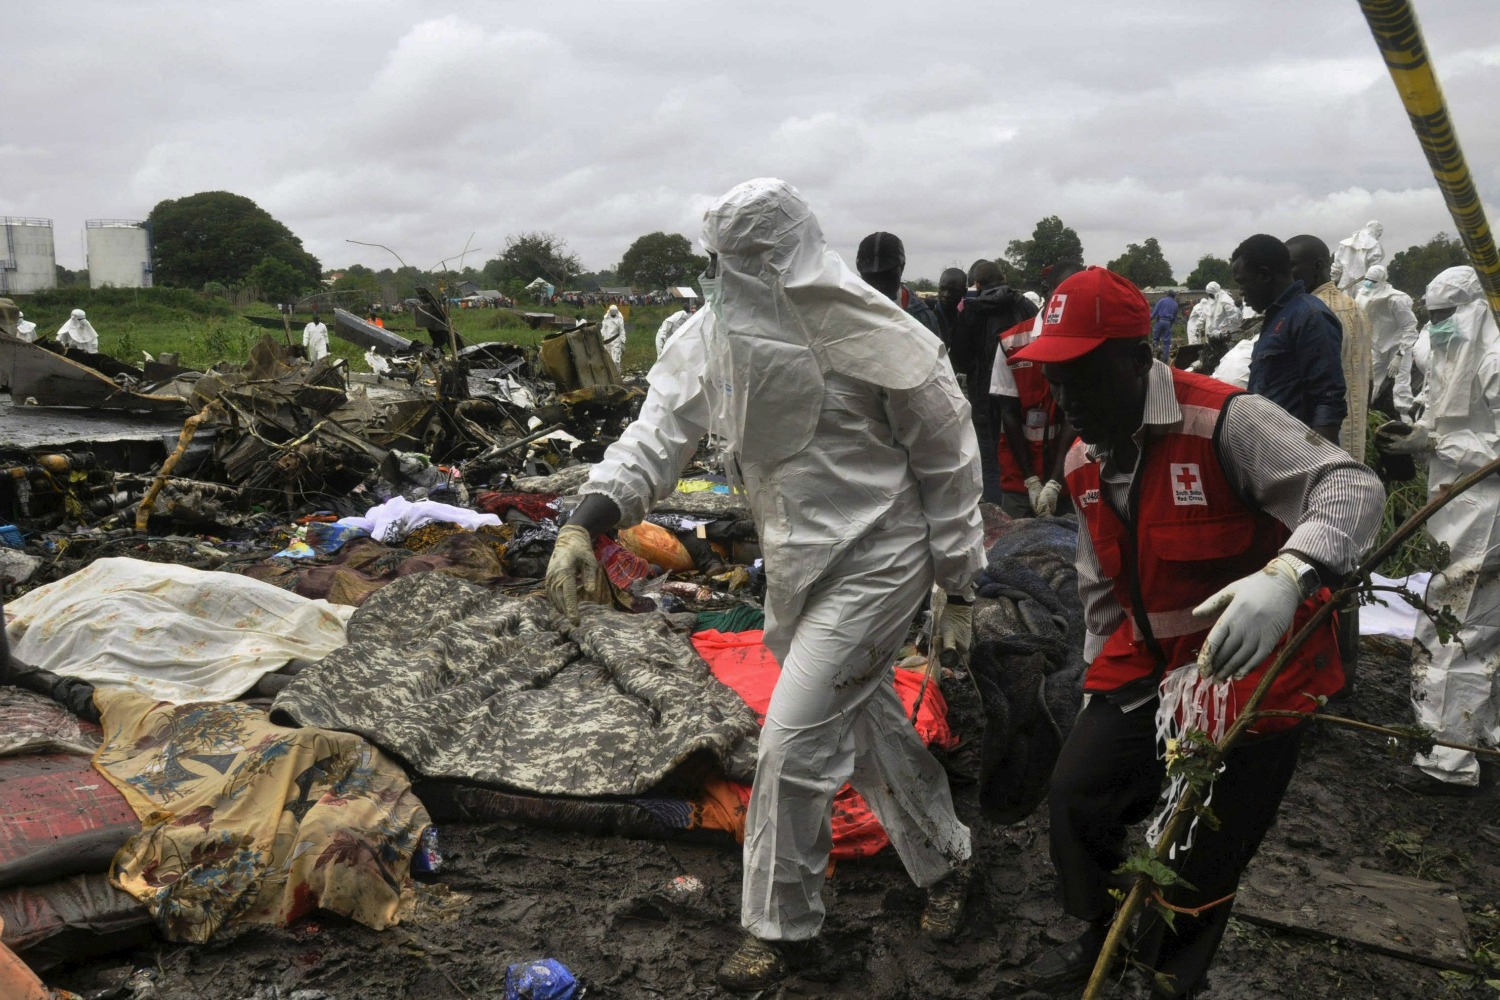 At least 40 killed in another Russian plane crash in South Sudan